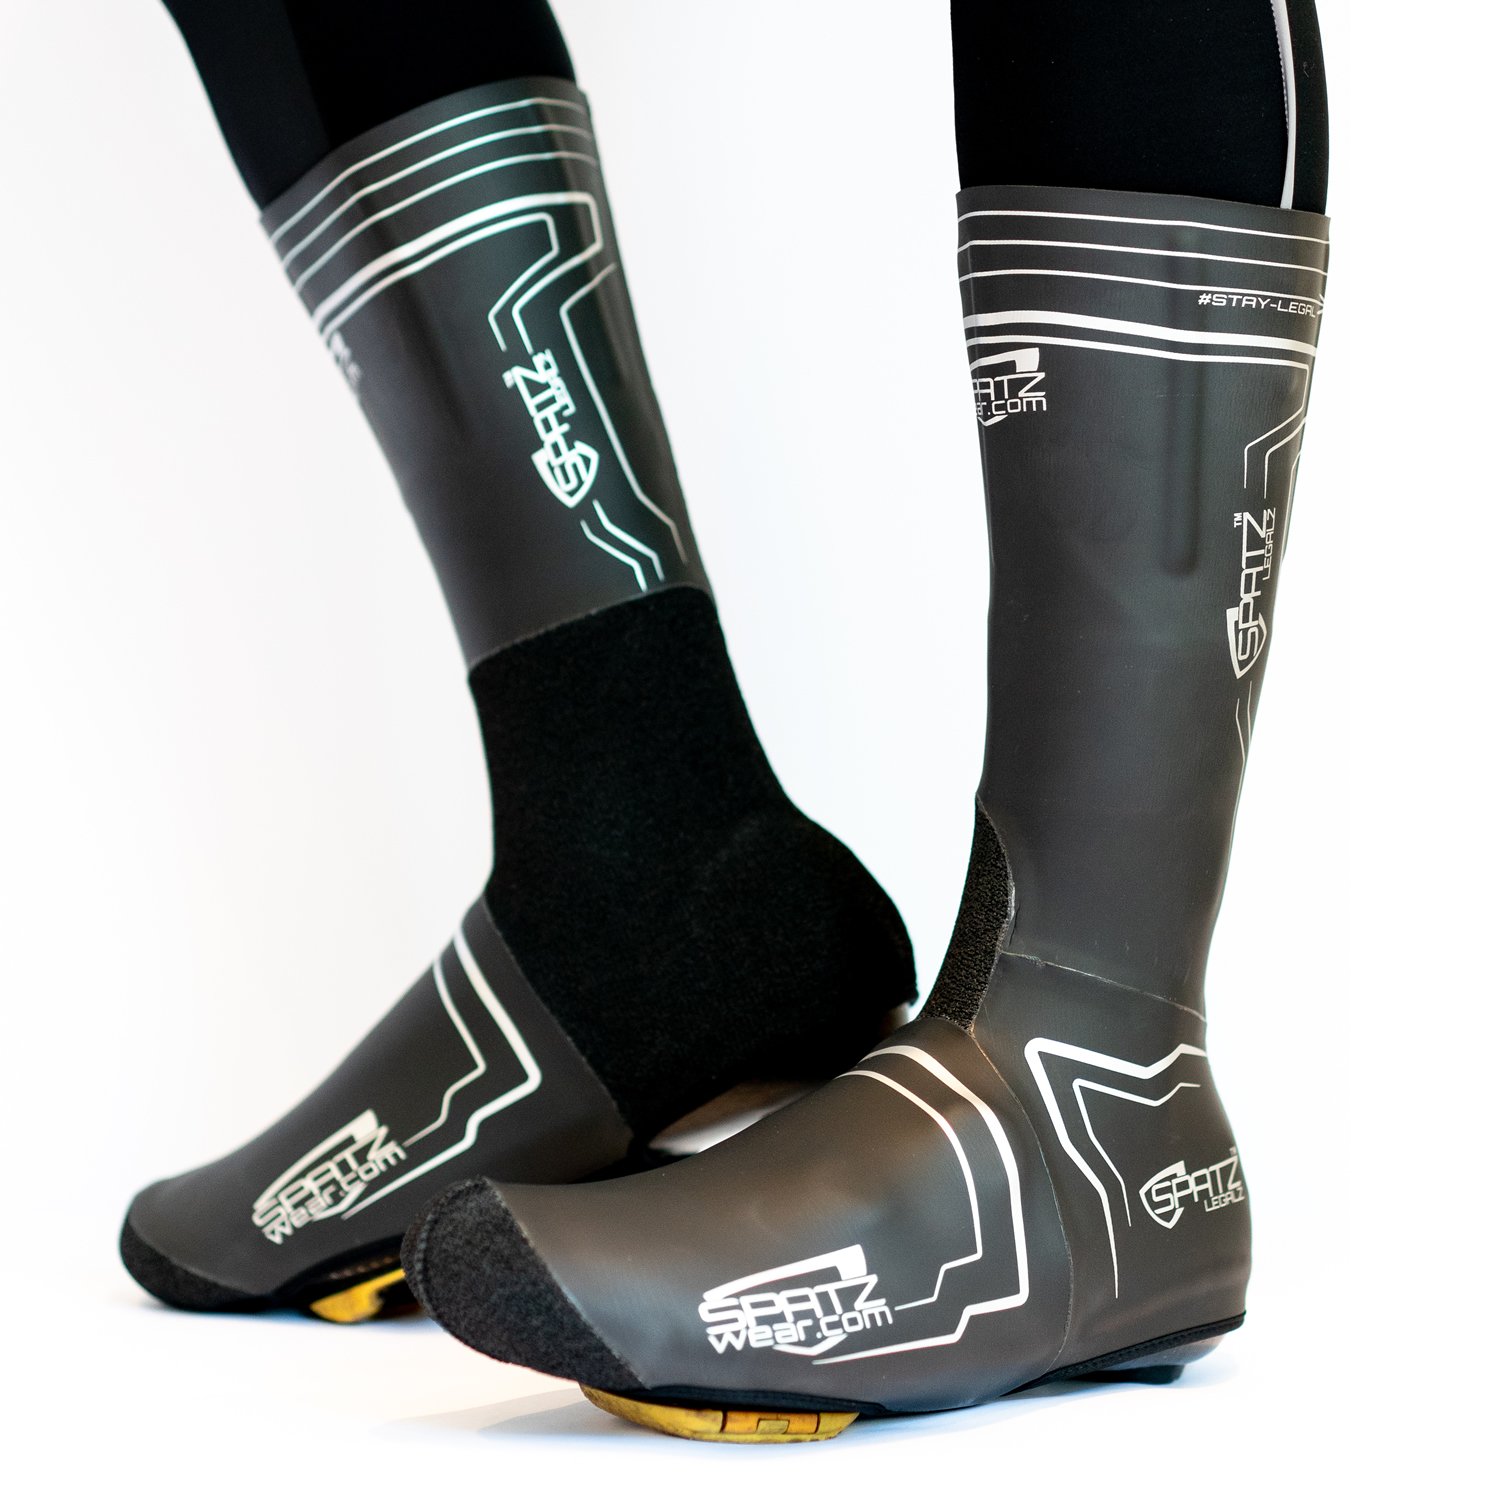 SPECIALIZED couvre-chaussures route et VTT Neoprene CYCLES ET SPORTS